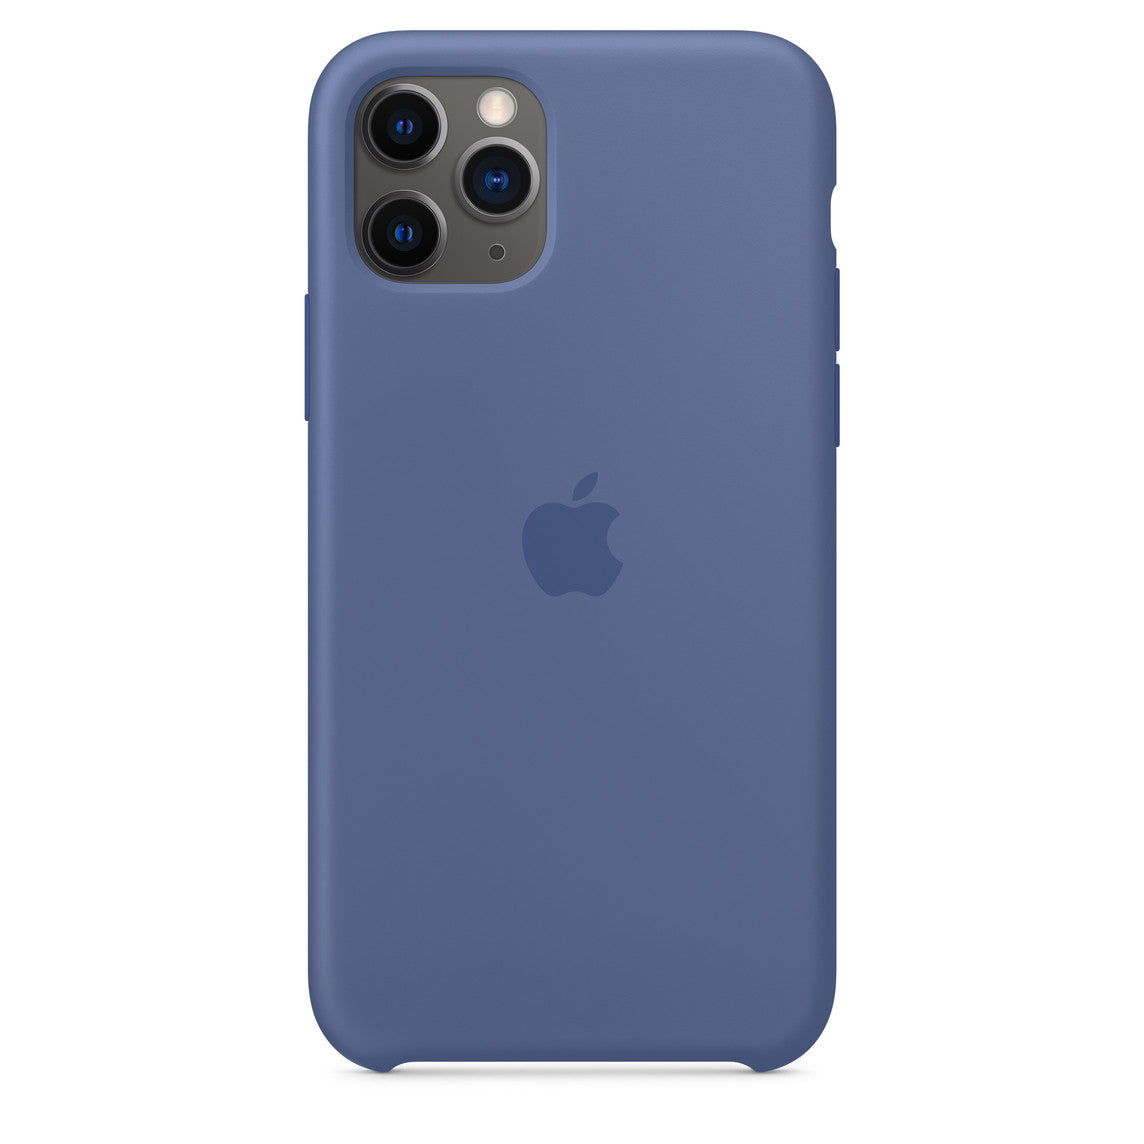 Apple iPhone 11 Pro Silicone Case - Linen Blue Linen Blue New - Sealed